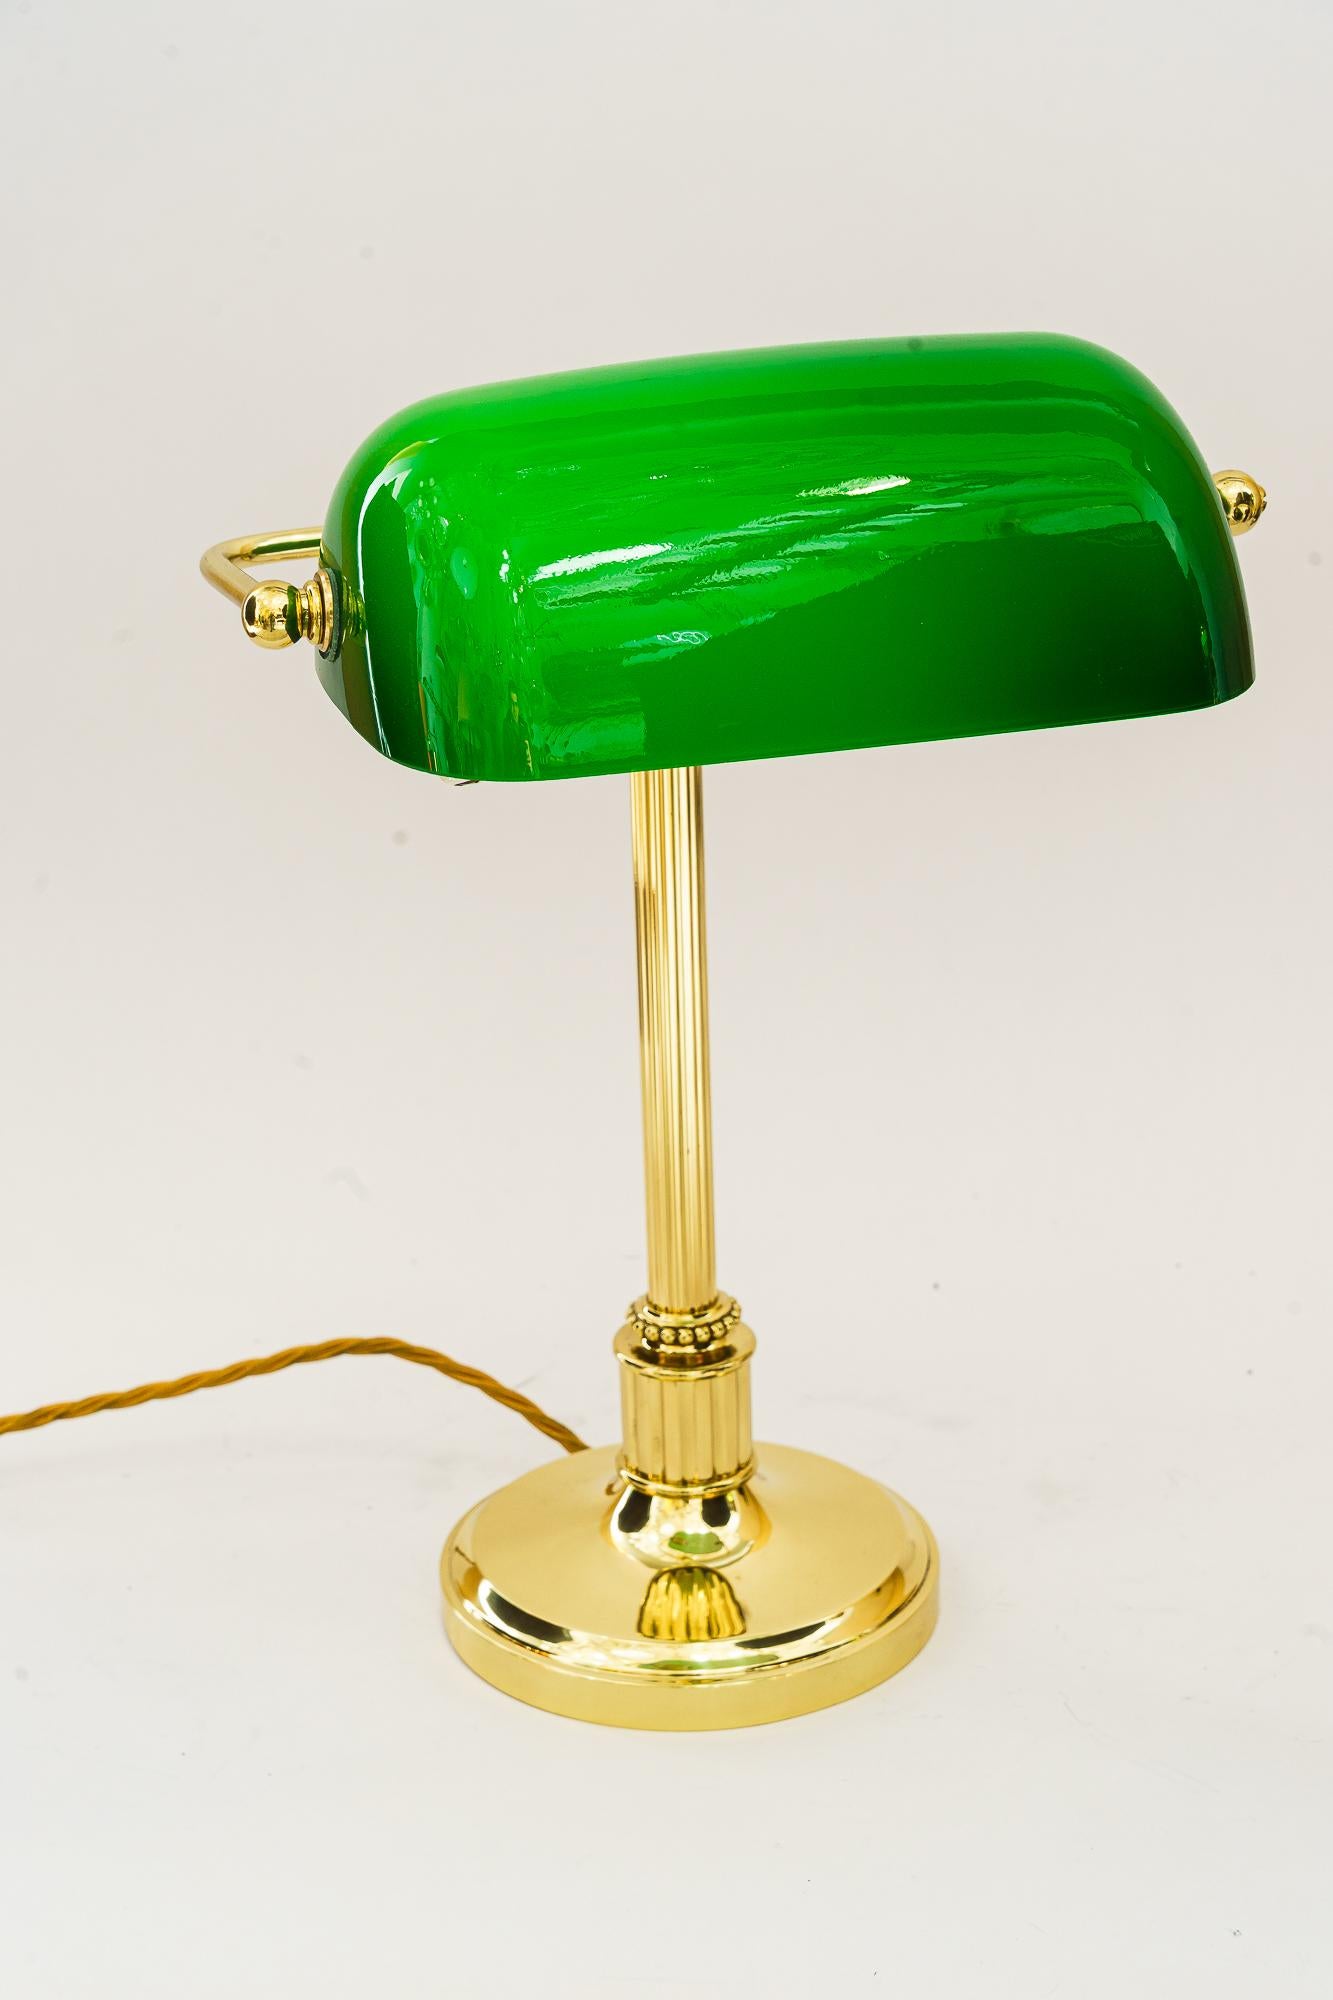 Art Deco Banker Lamp with Green Glass Shade, Vienna, Around 1920s
Brass polished and stove enameled.
Original glass shade.